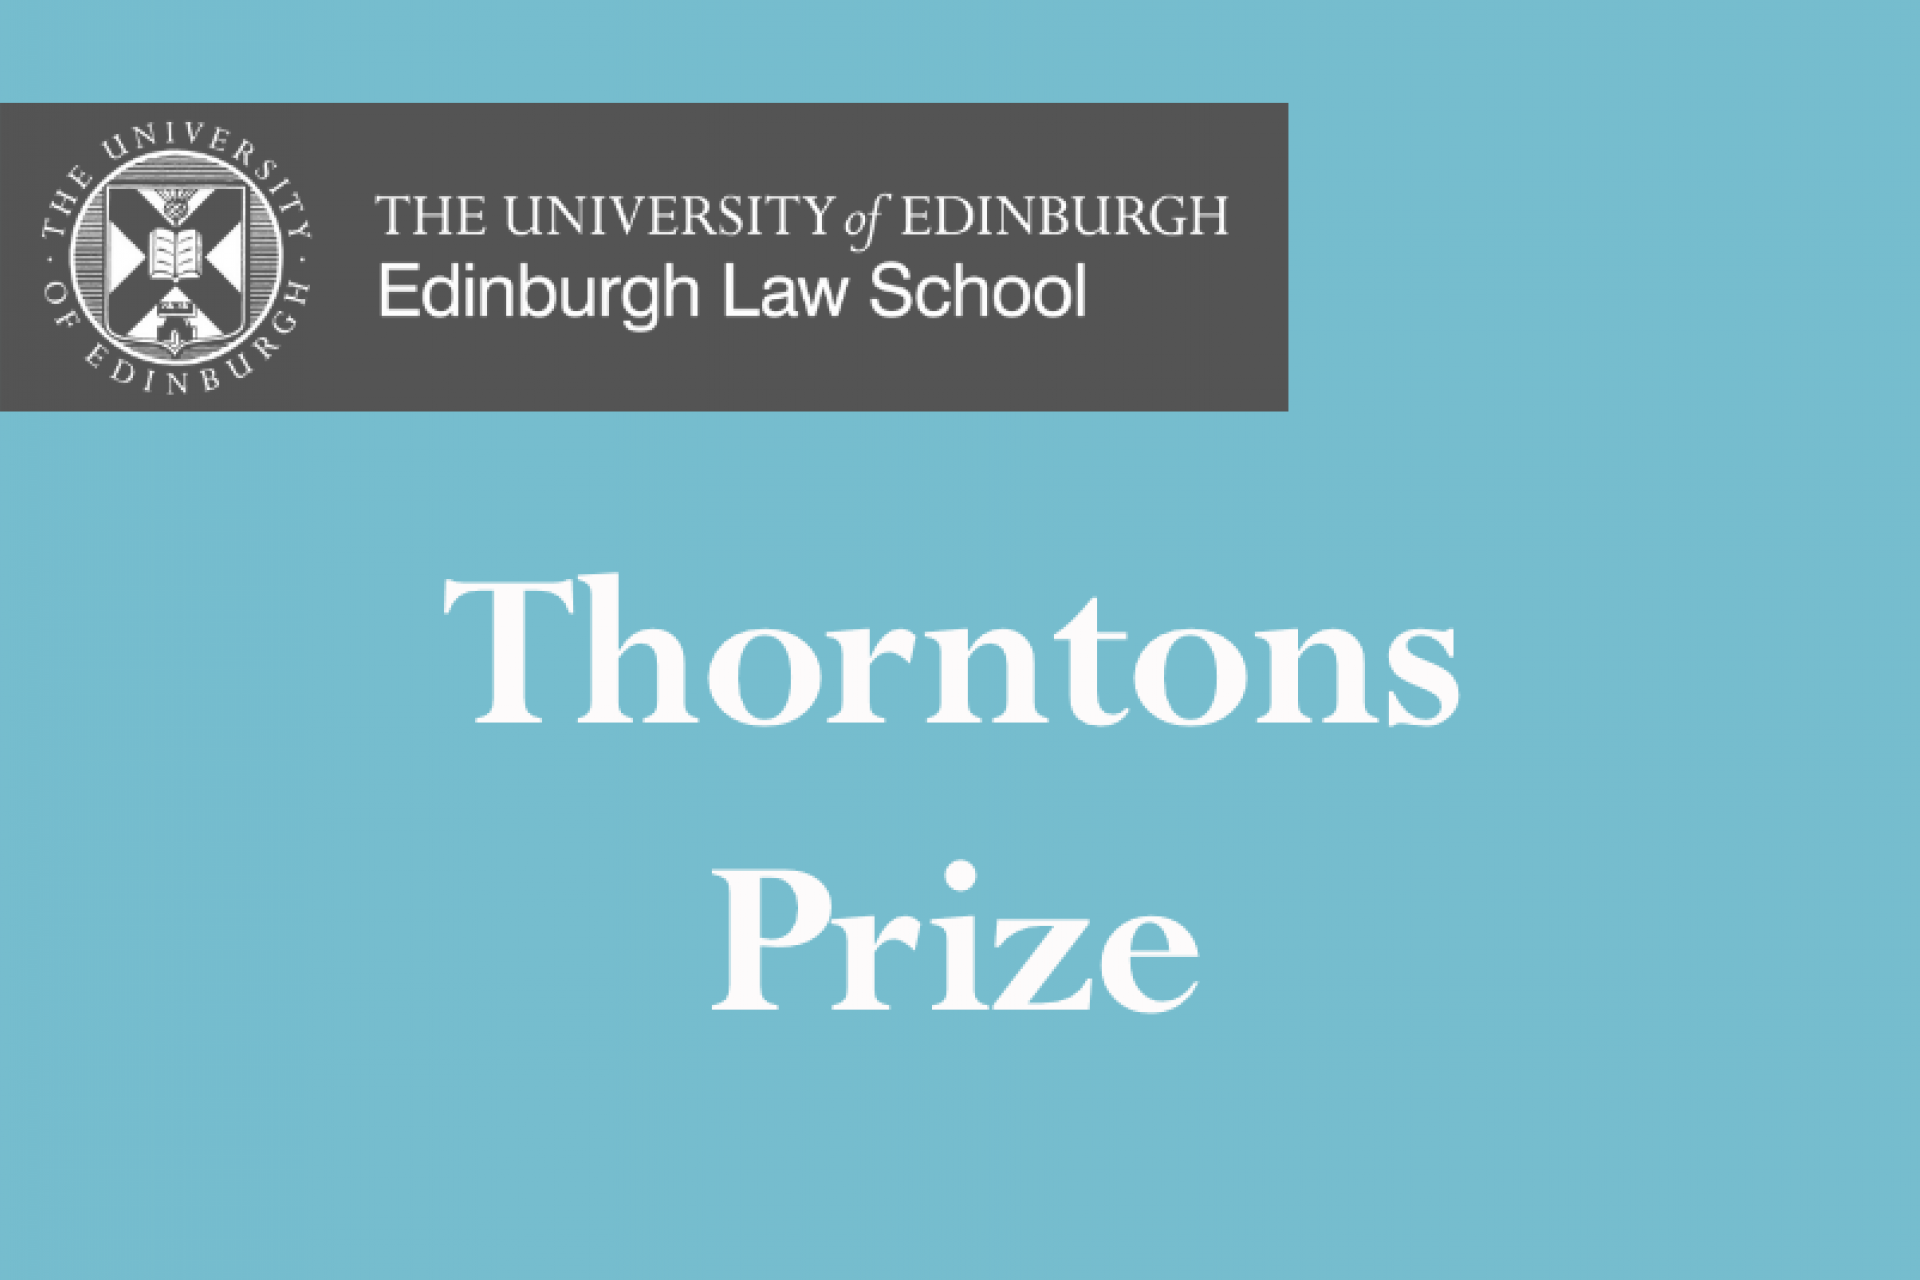 Thorntons Prize